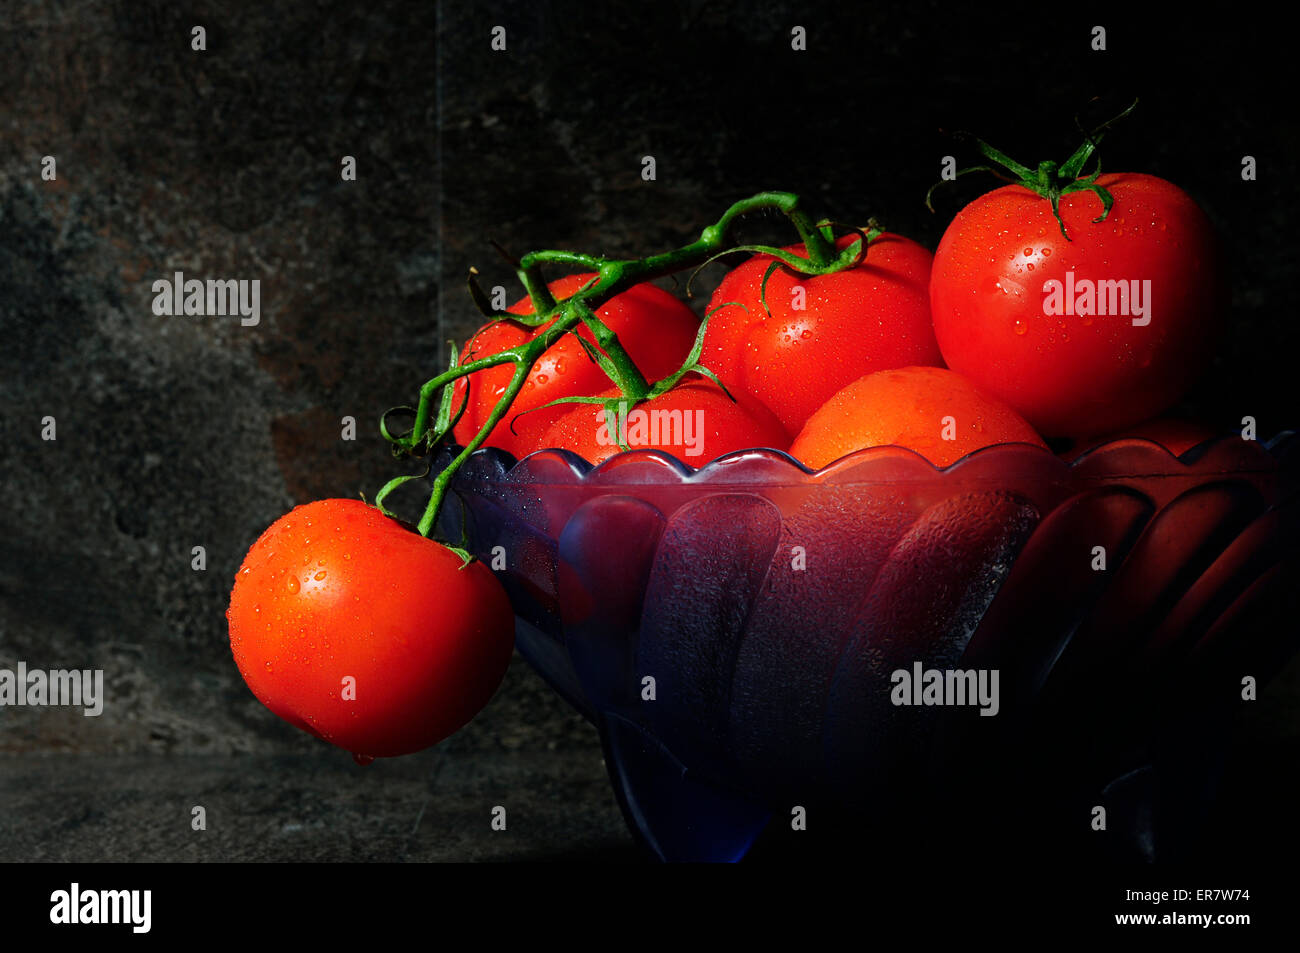 Still life closeup of bright red tomatoes in blue vintage bowl against a dramatic black slate kitchen setting Stock Photo